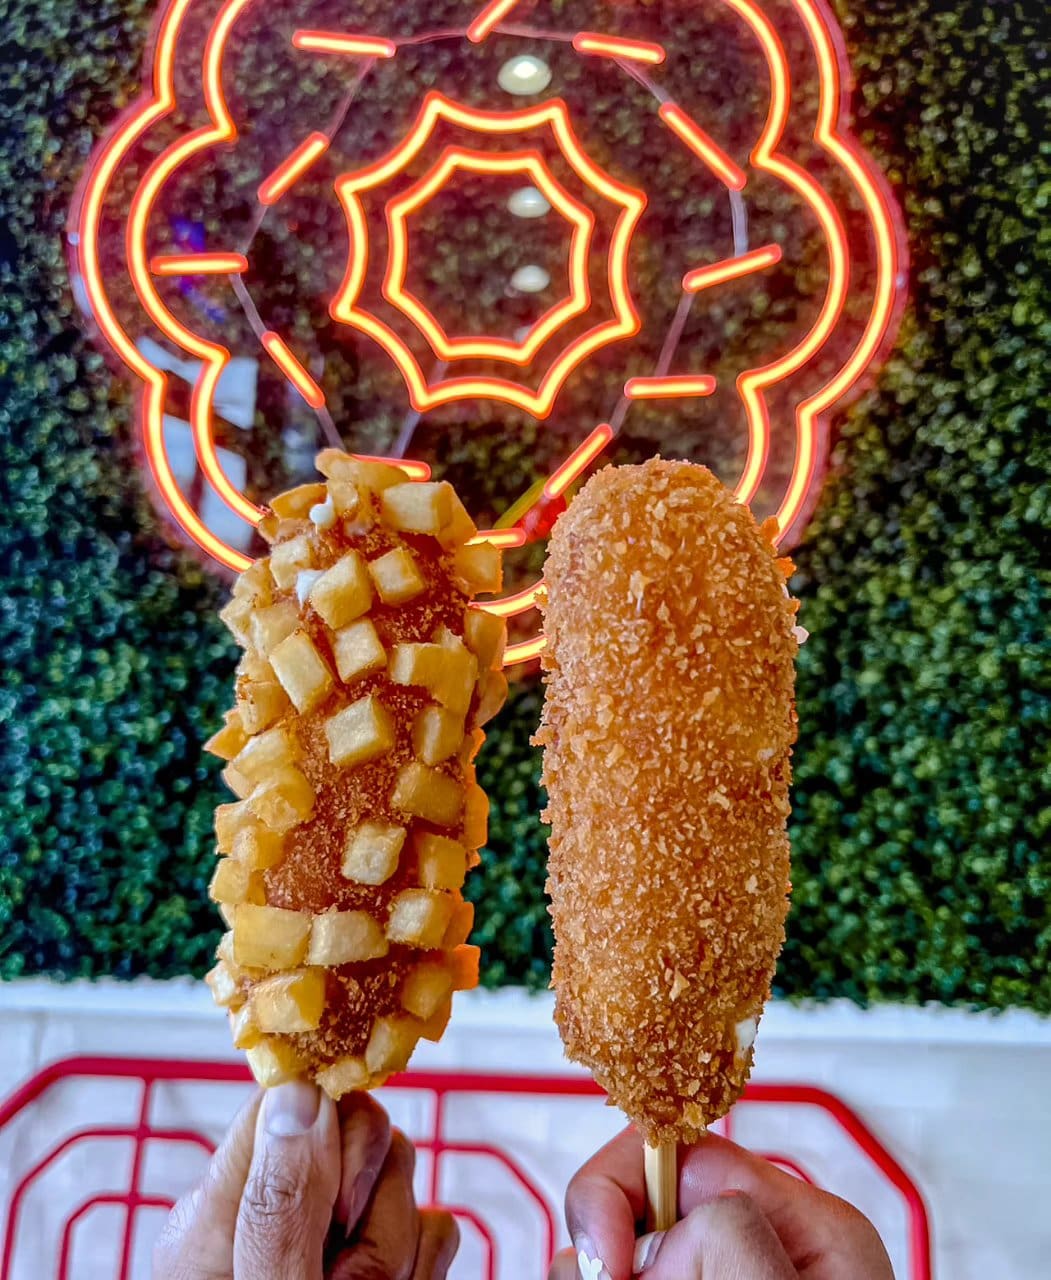 Two delicious Mochinut rice hot dogs on display, symbolizing the fusion of American and Japanese cultures.